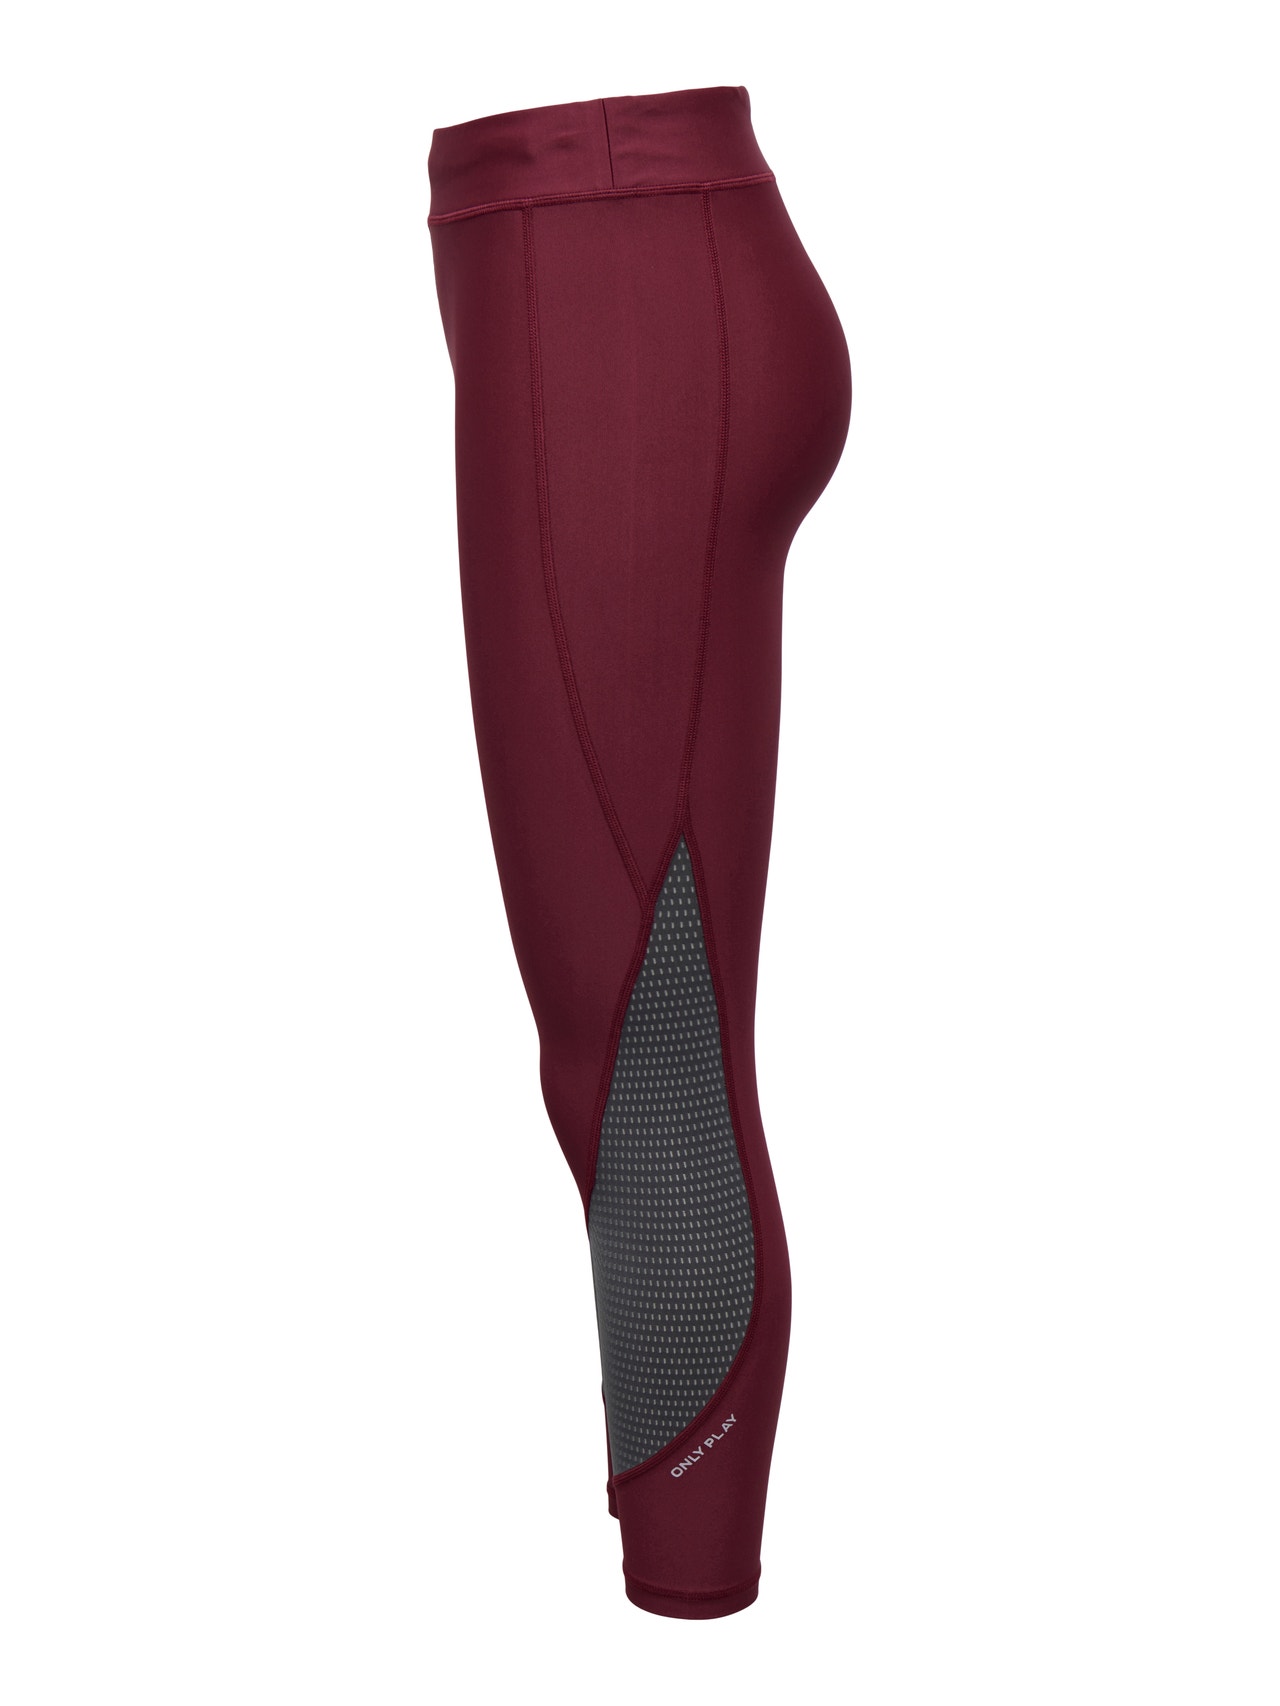 ONLY Tight Fit High waist Leggings -Windsor Wine - 15294976